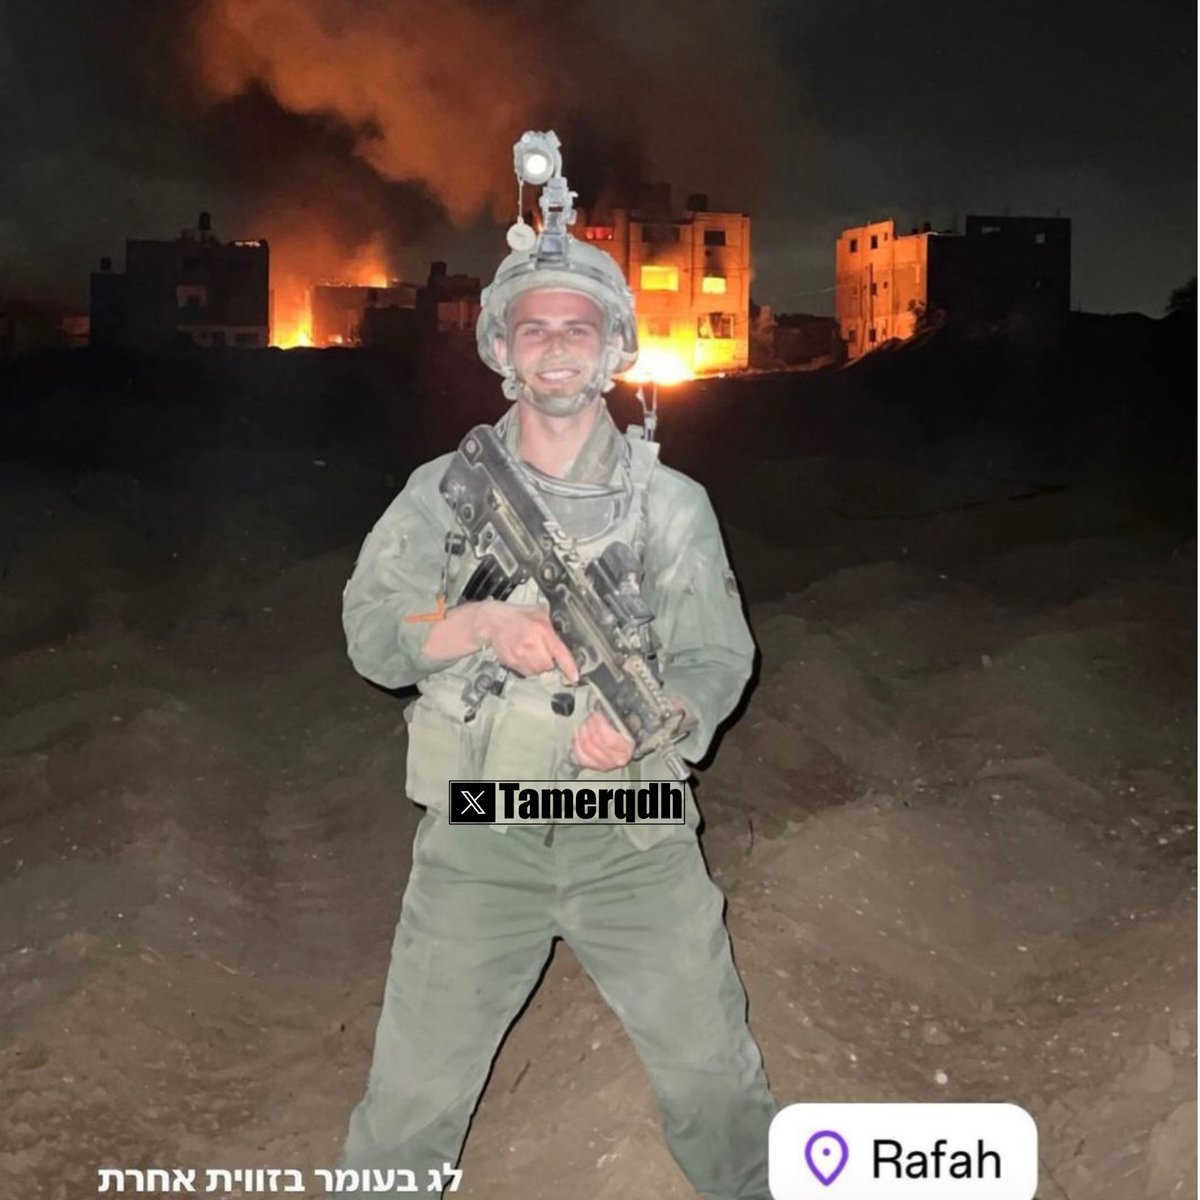 48 hours later & not a single mainstream media outlet covered Israeli soldiers mass burning civilian homes in Rafah with immense satisfaction & joy! Imagine those were Hamas militants posing for such pics at Israelis kibbutzim, how many 'Arab savagery' headlines would there be?